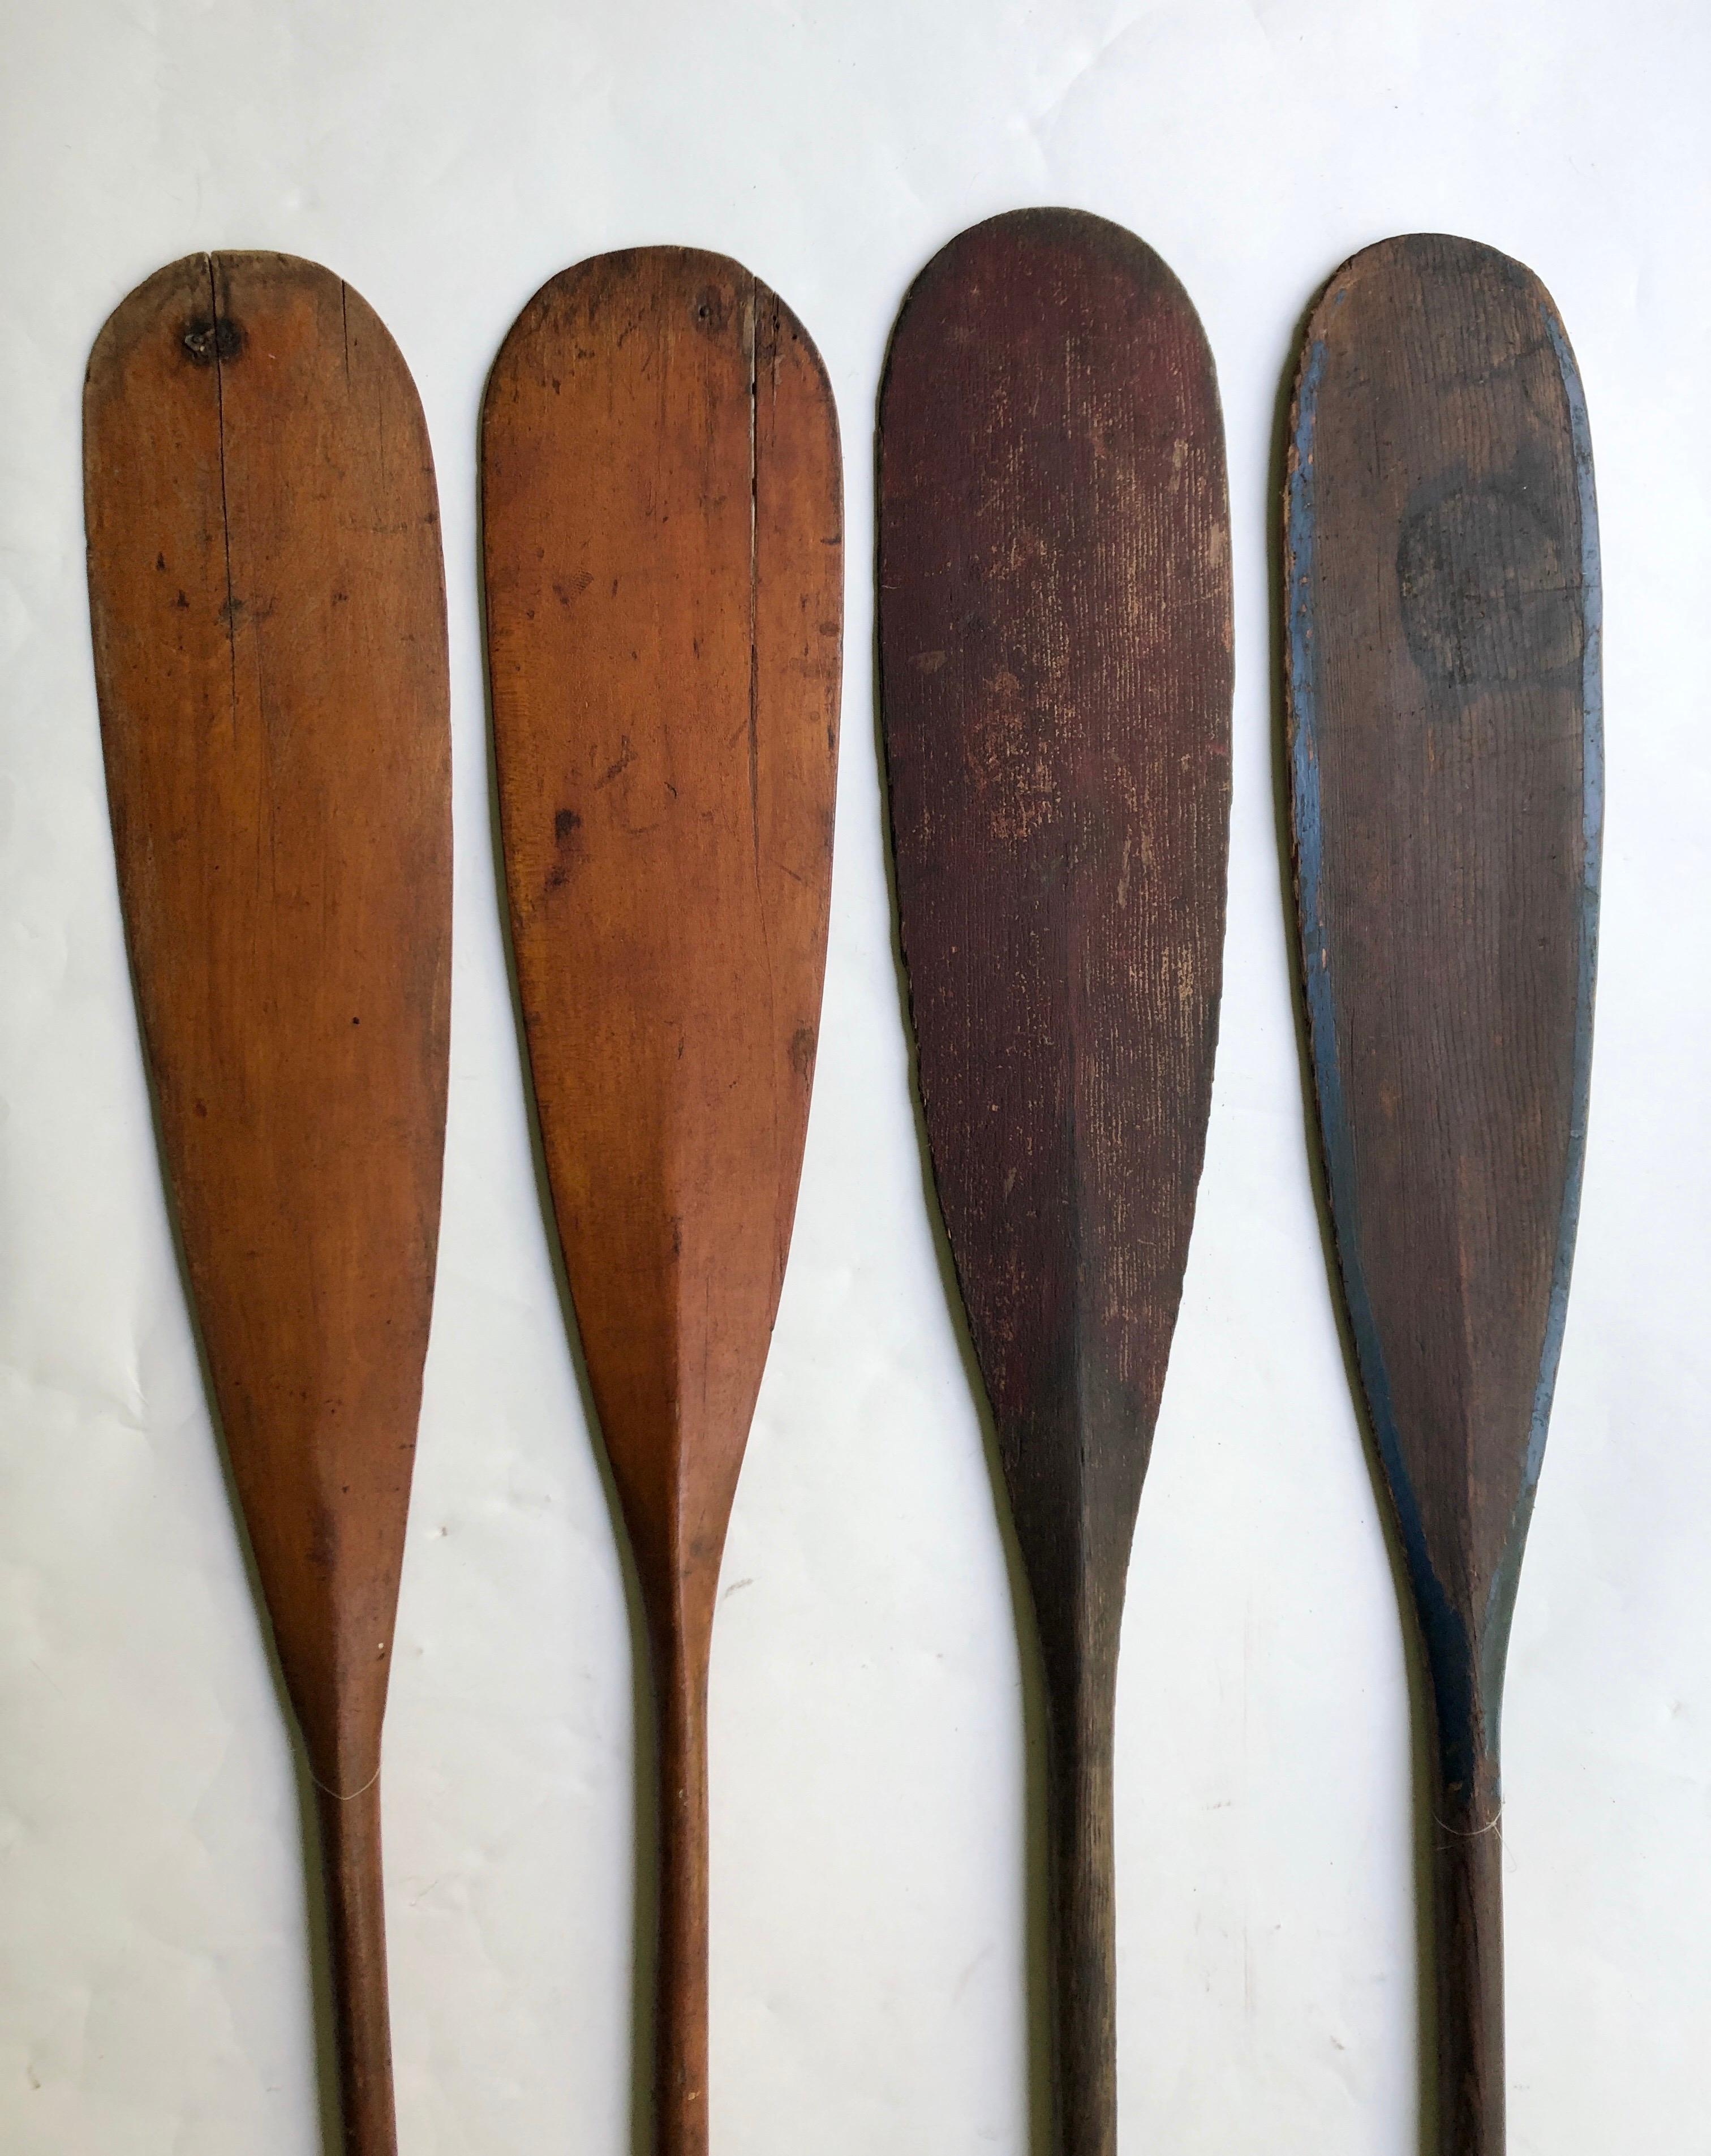 4 antique wooden canoe paddles. Untouched original surface. Great display for a summer or beach house. They measure 58